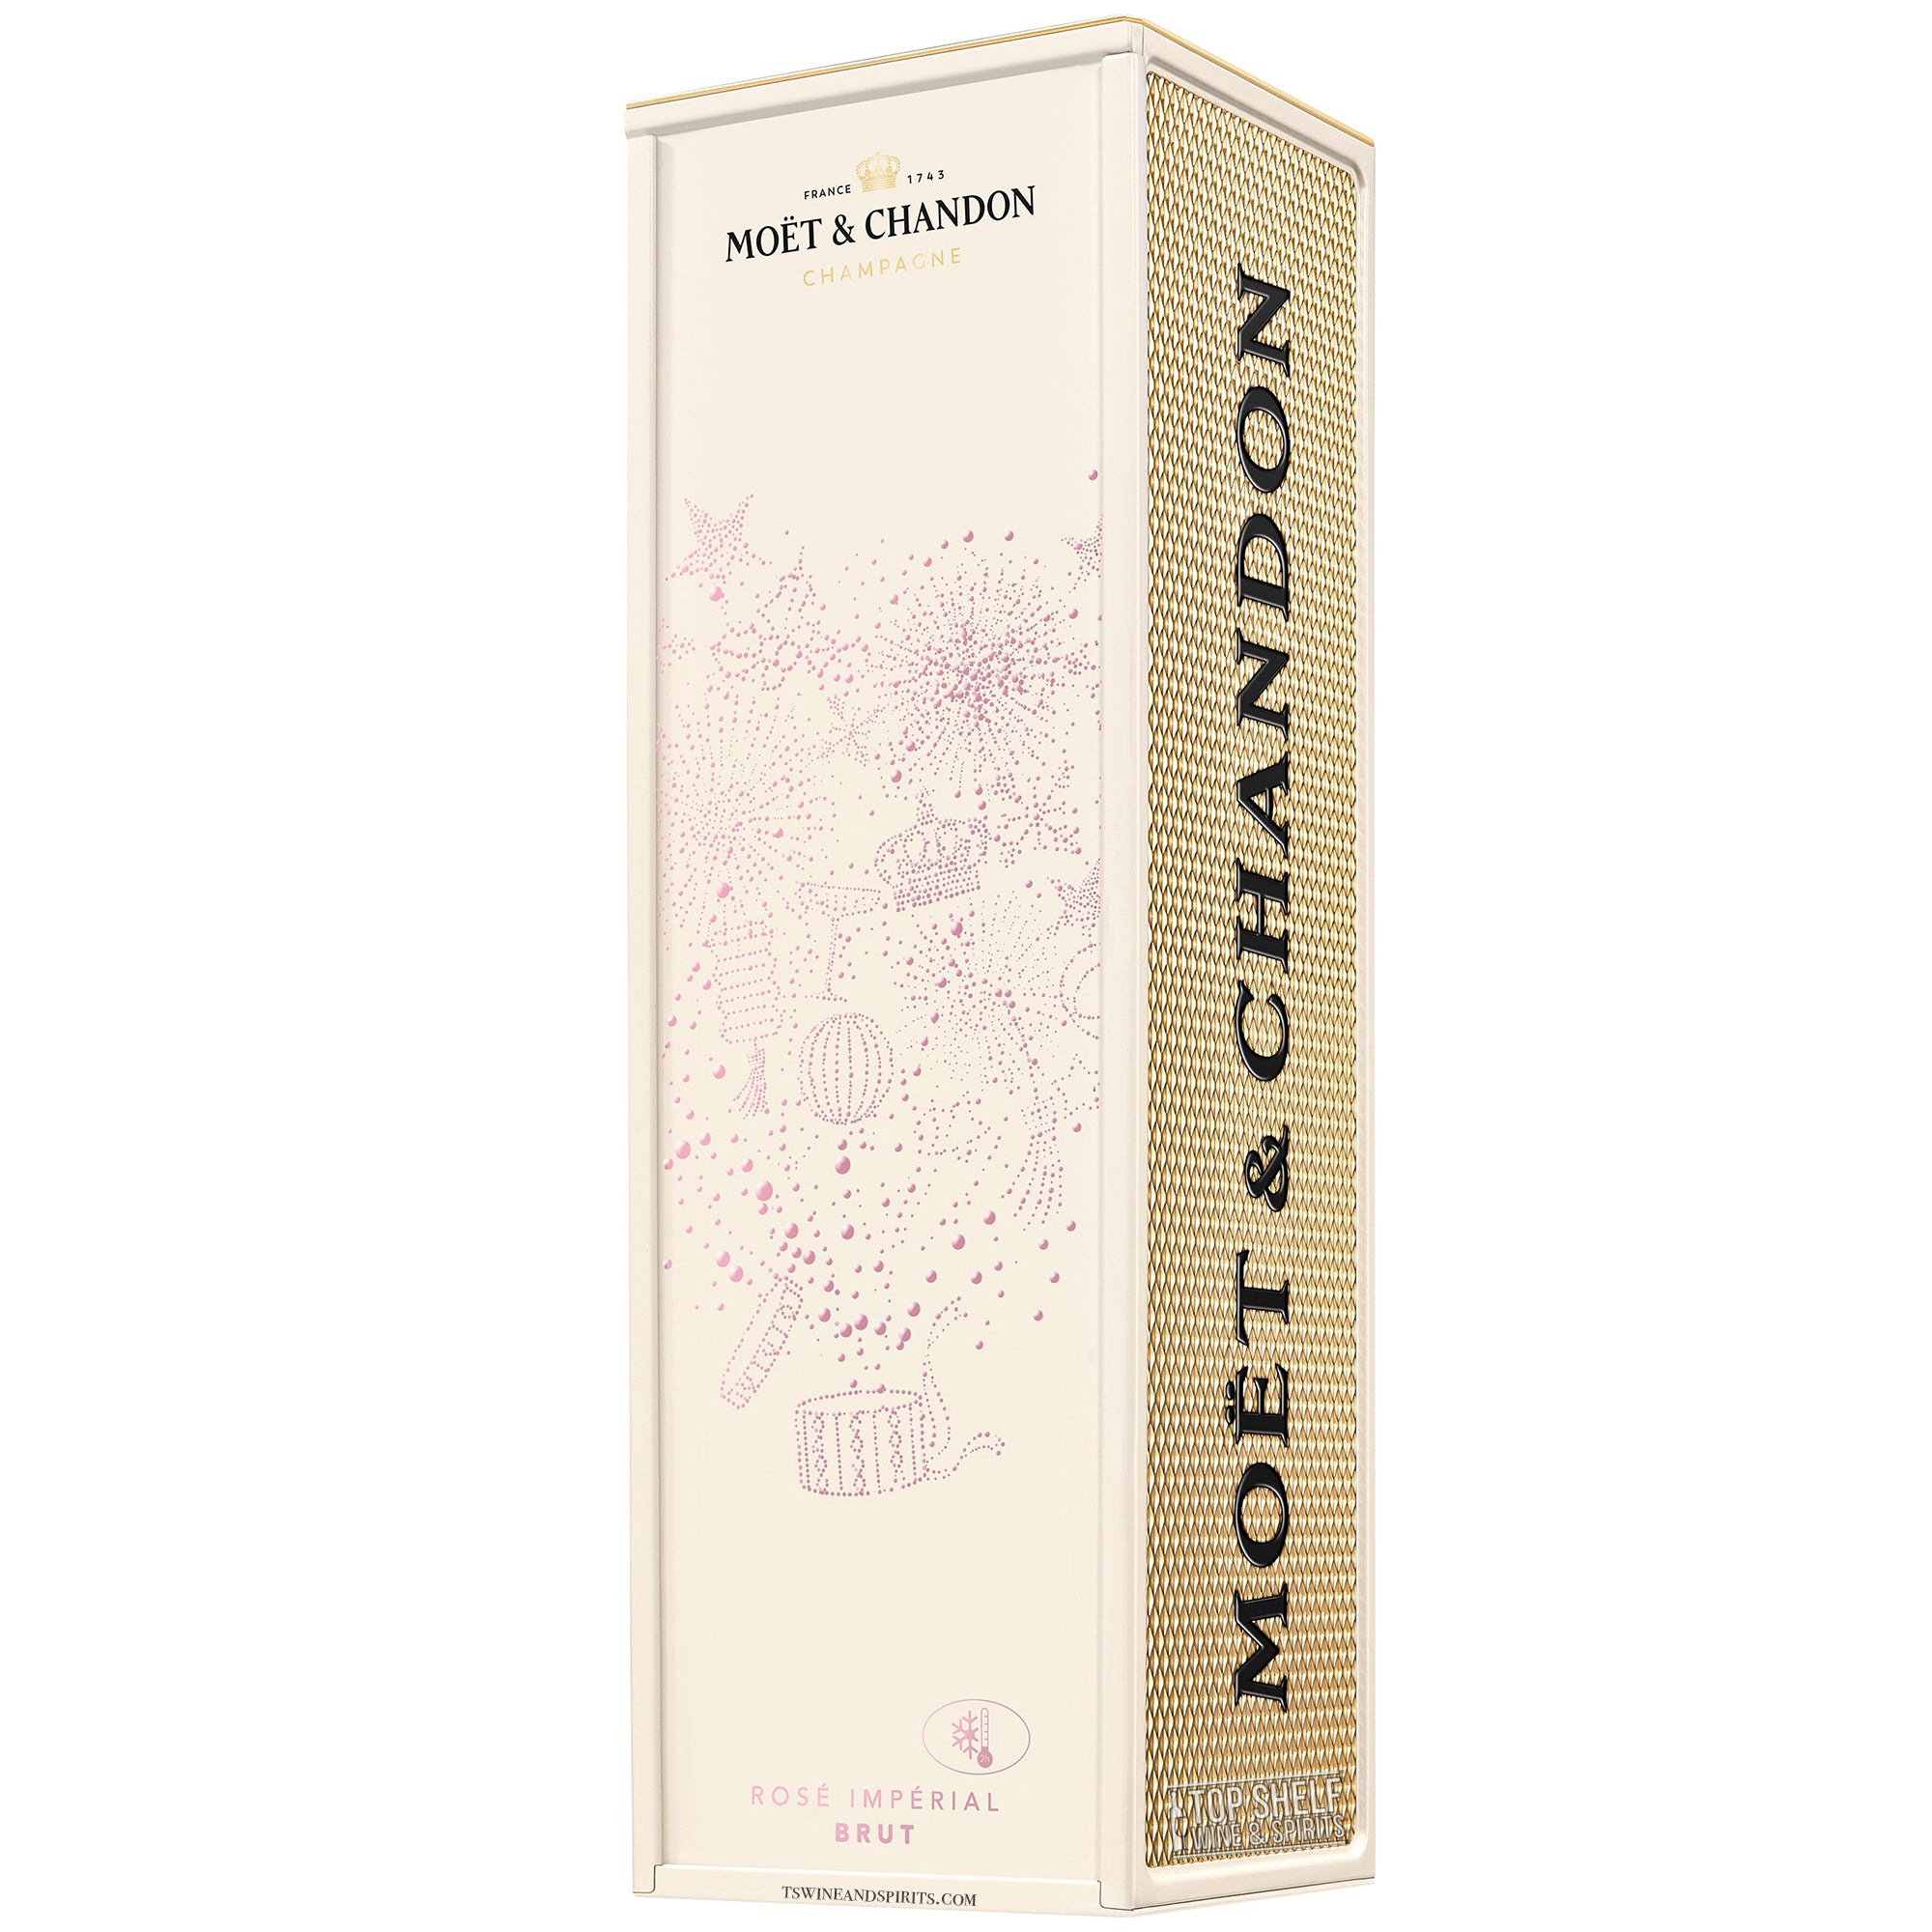 Moet & Chandon Imperial Brut Rose Champagne with Milestone Gift Box